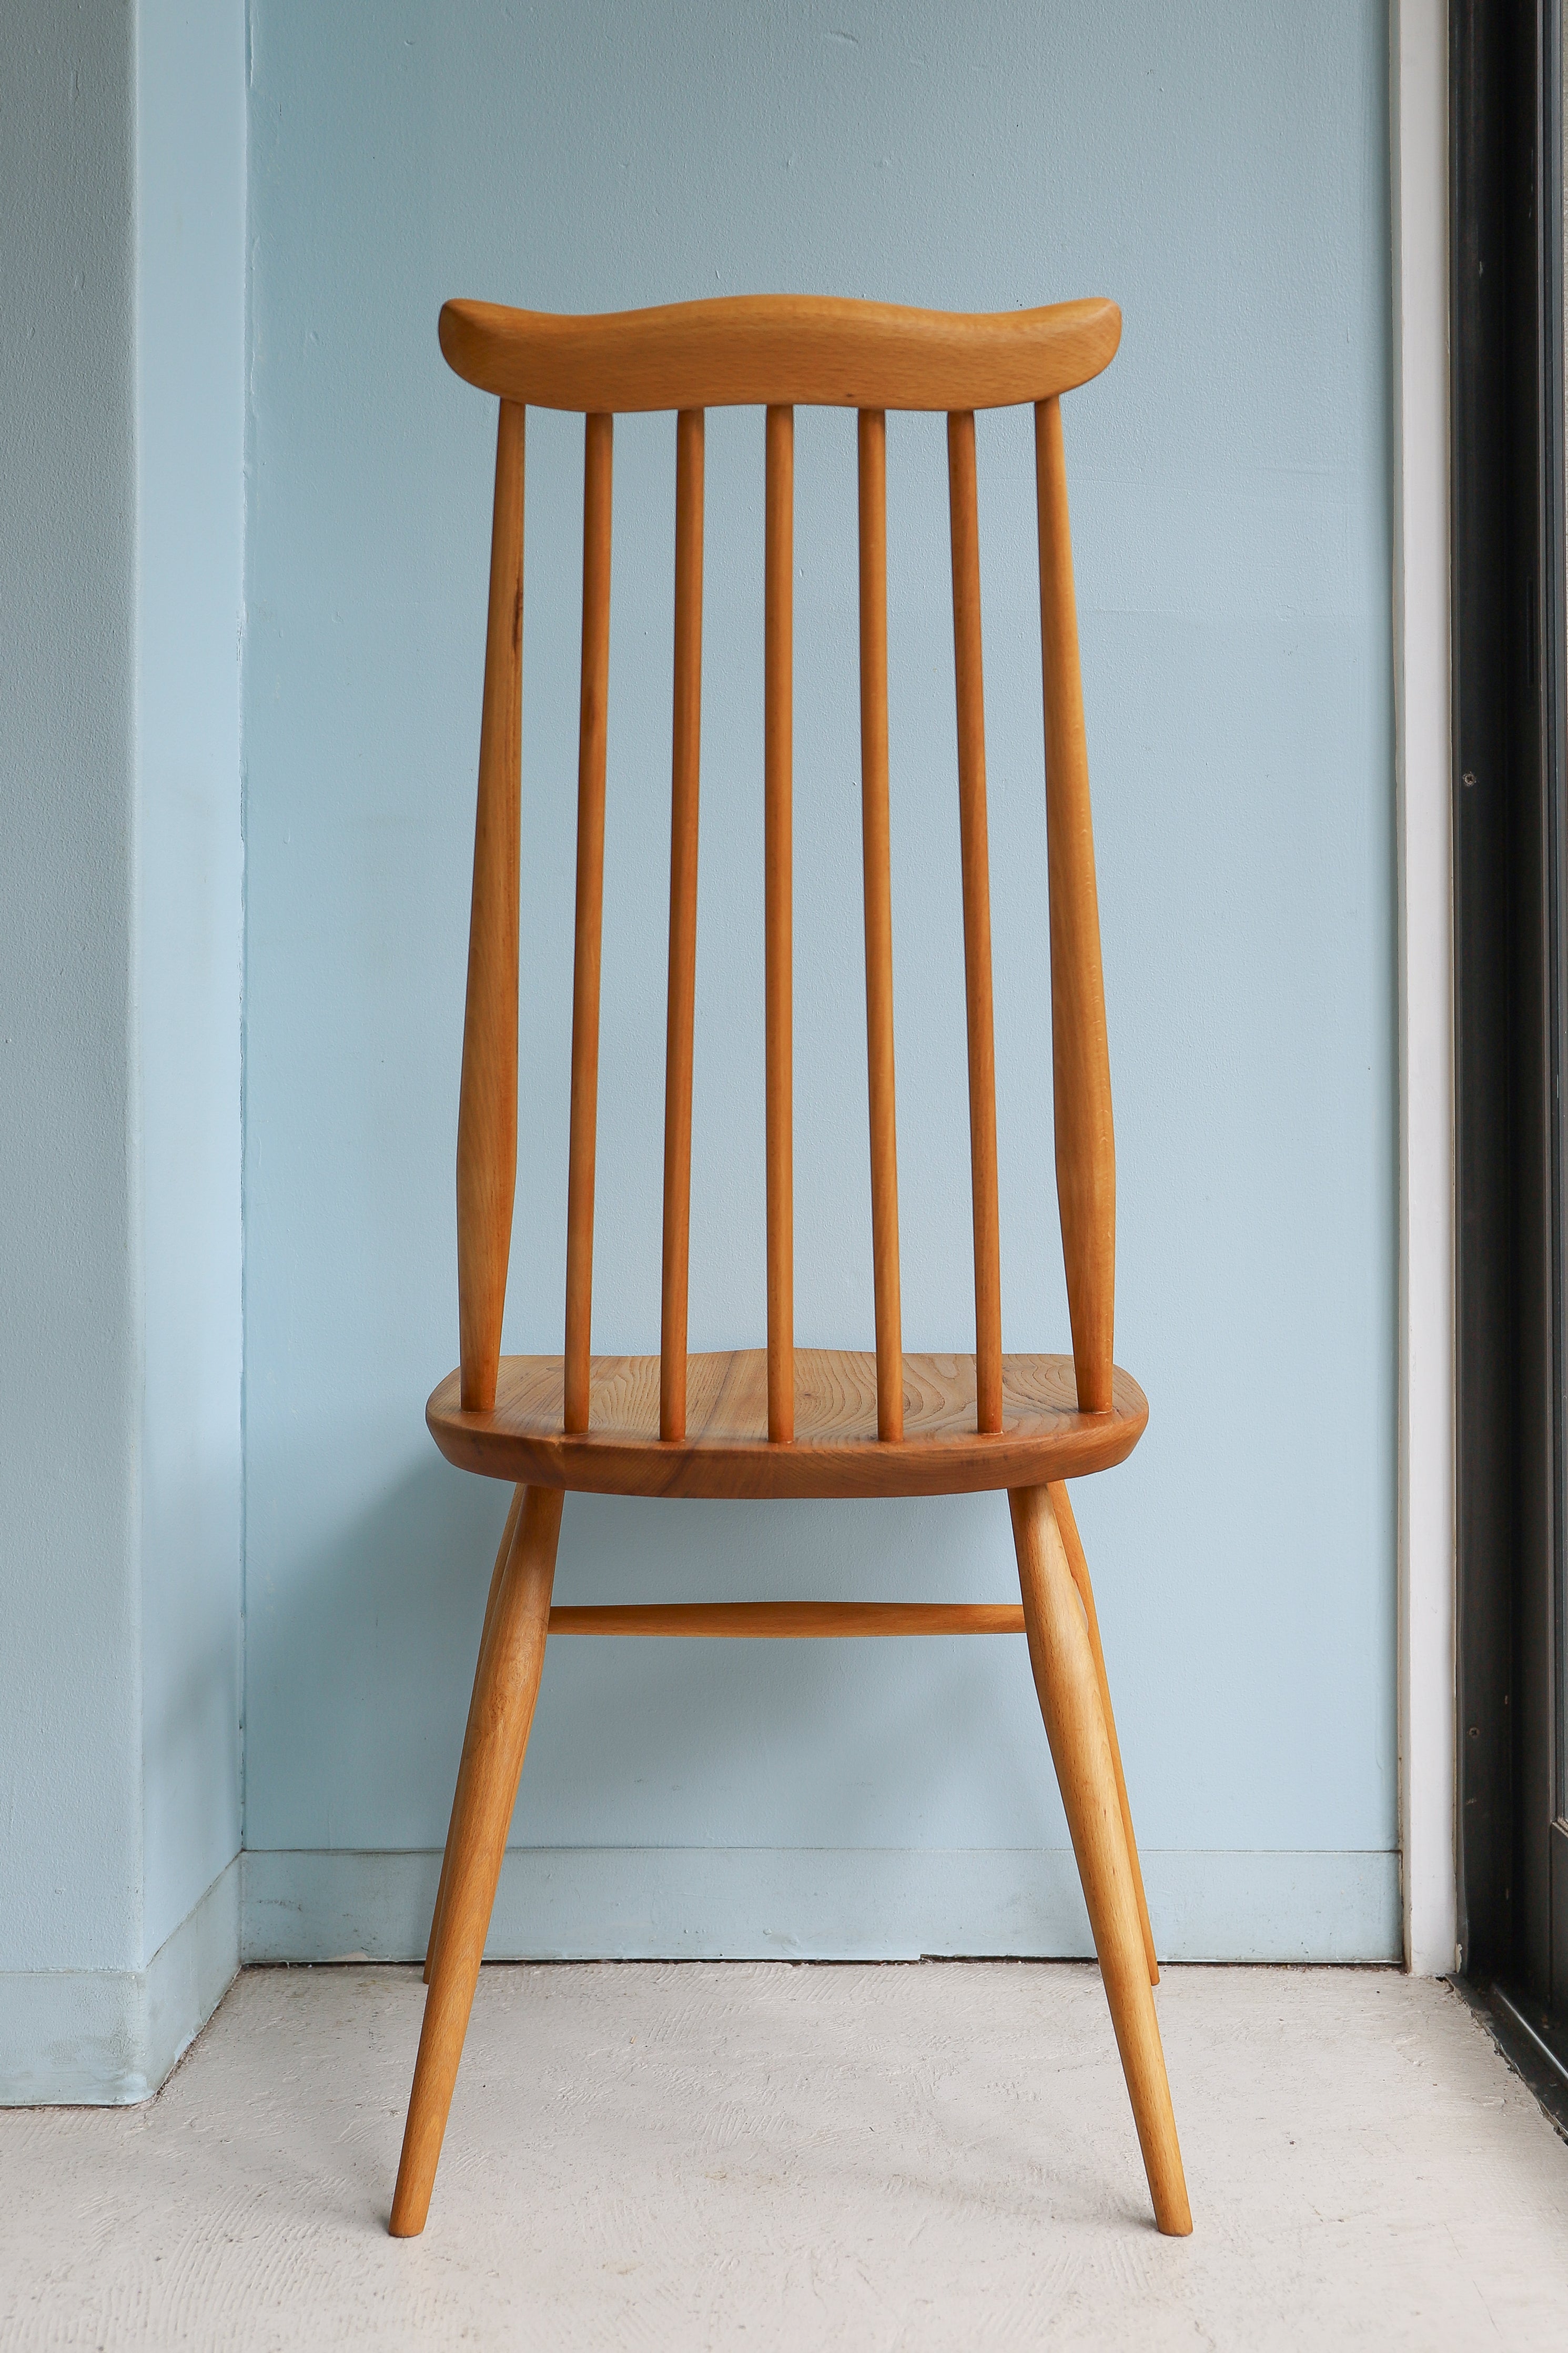 UK Vintage Ercol Chair/イギリスヴィンテージ アーコール ダイニングチェア 椅子